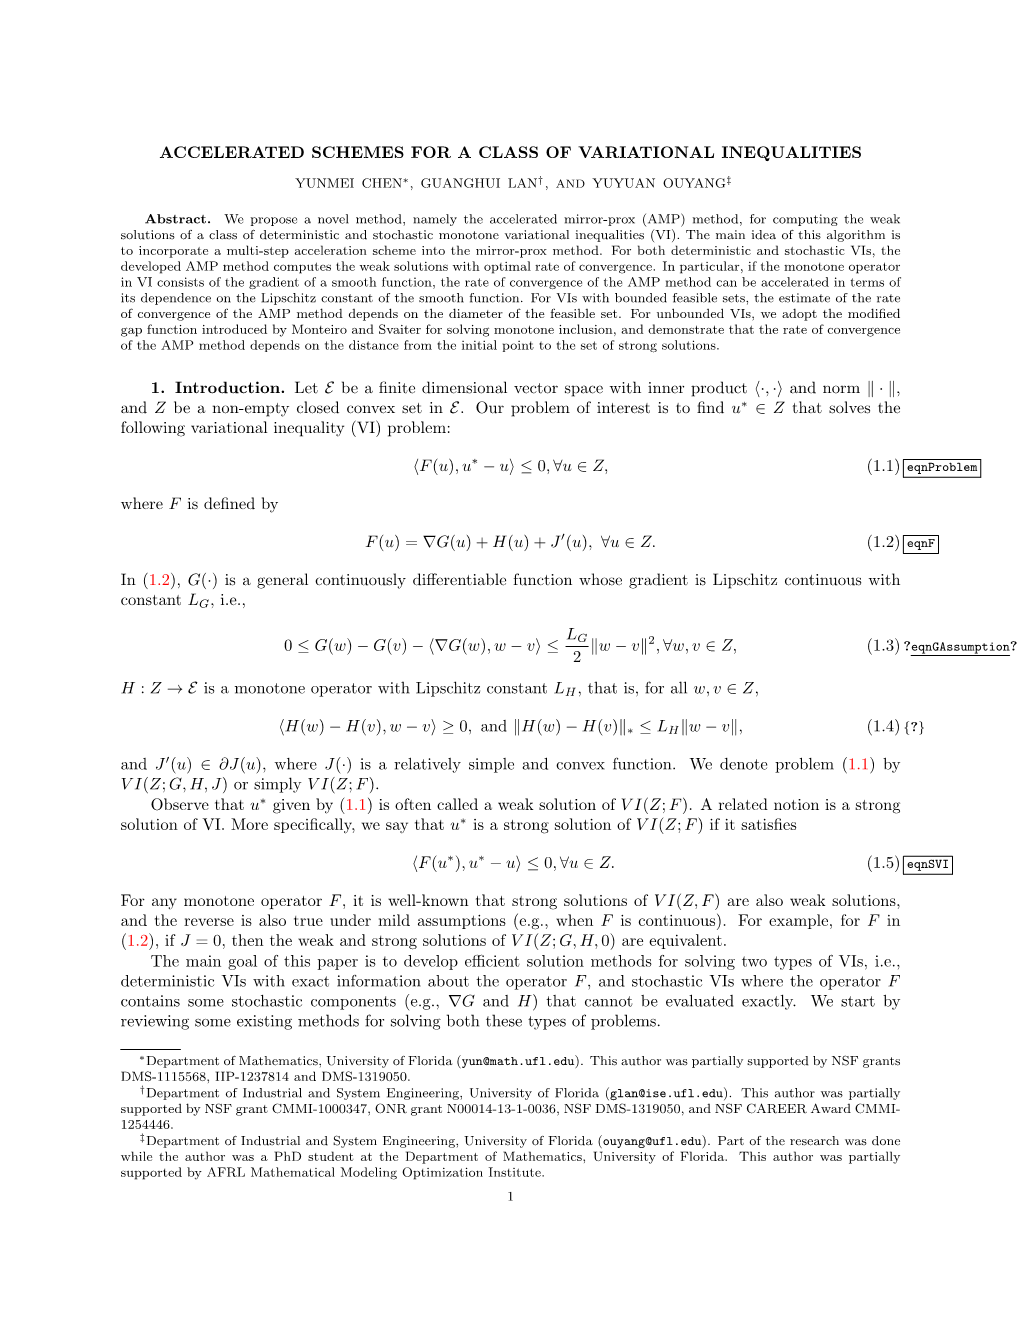 Accelerated Schemes for a Class of Variational Inequalities